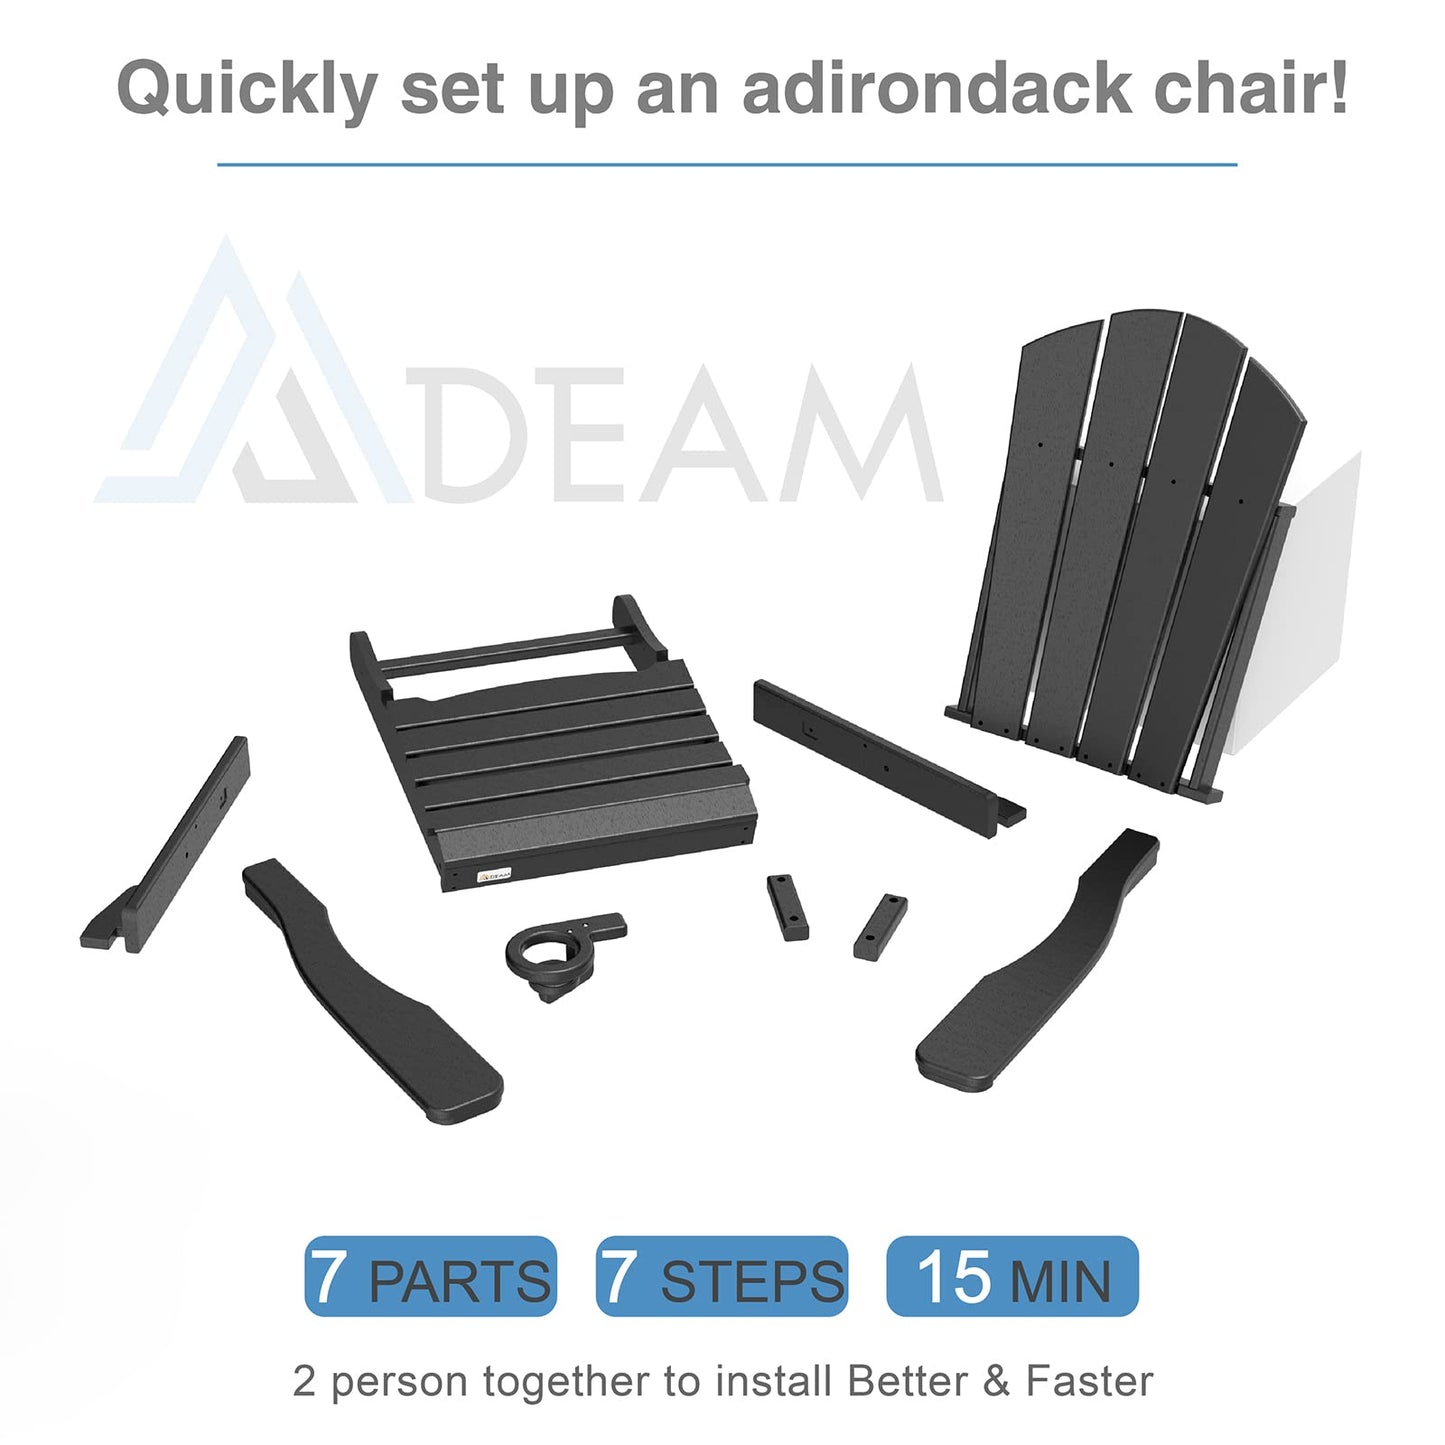 Mdeam Folding Adirondack Chairs Set of 4 Adjustable Backrest with Cup Holder, Fire Pit Chairs,HDPE All Weather for Patio Lawn Outdoor, Black